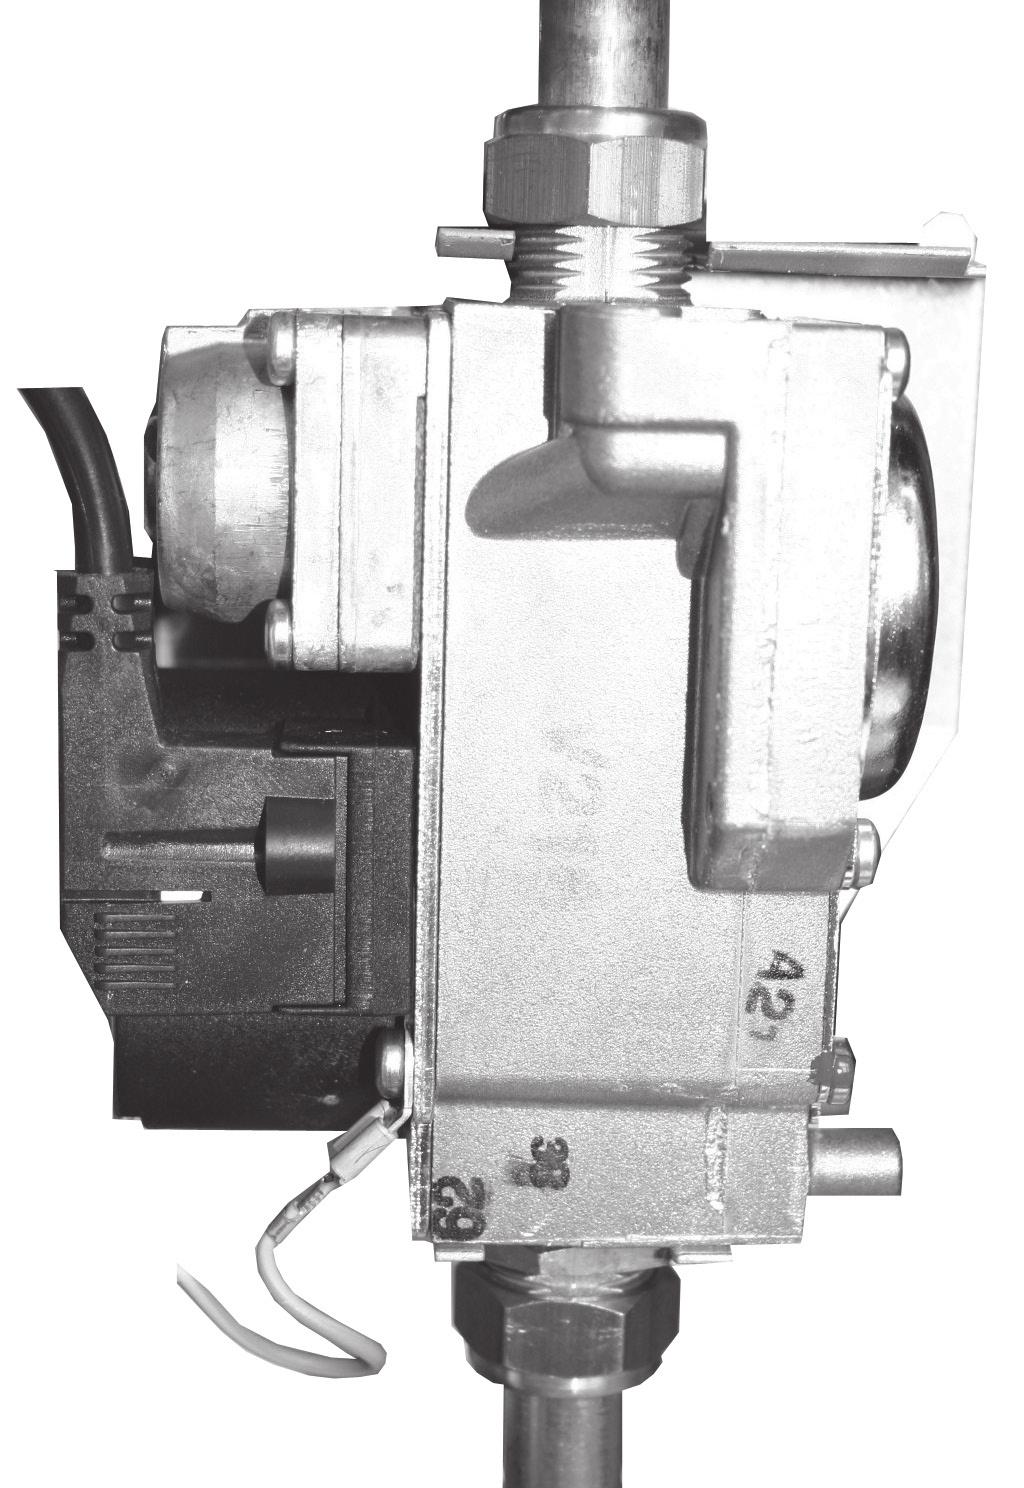 57 gas control valve replacement SERVICING 1. Refer to Frame 49. 2. Unplug the electrical plug connection from the gas control valve and disconnect the earth wire. 3.